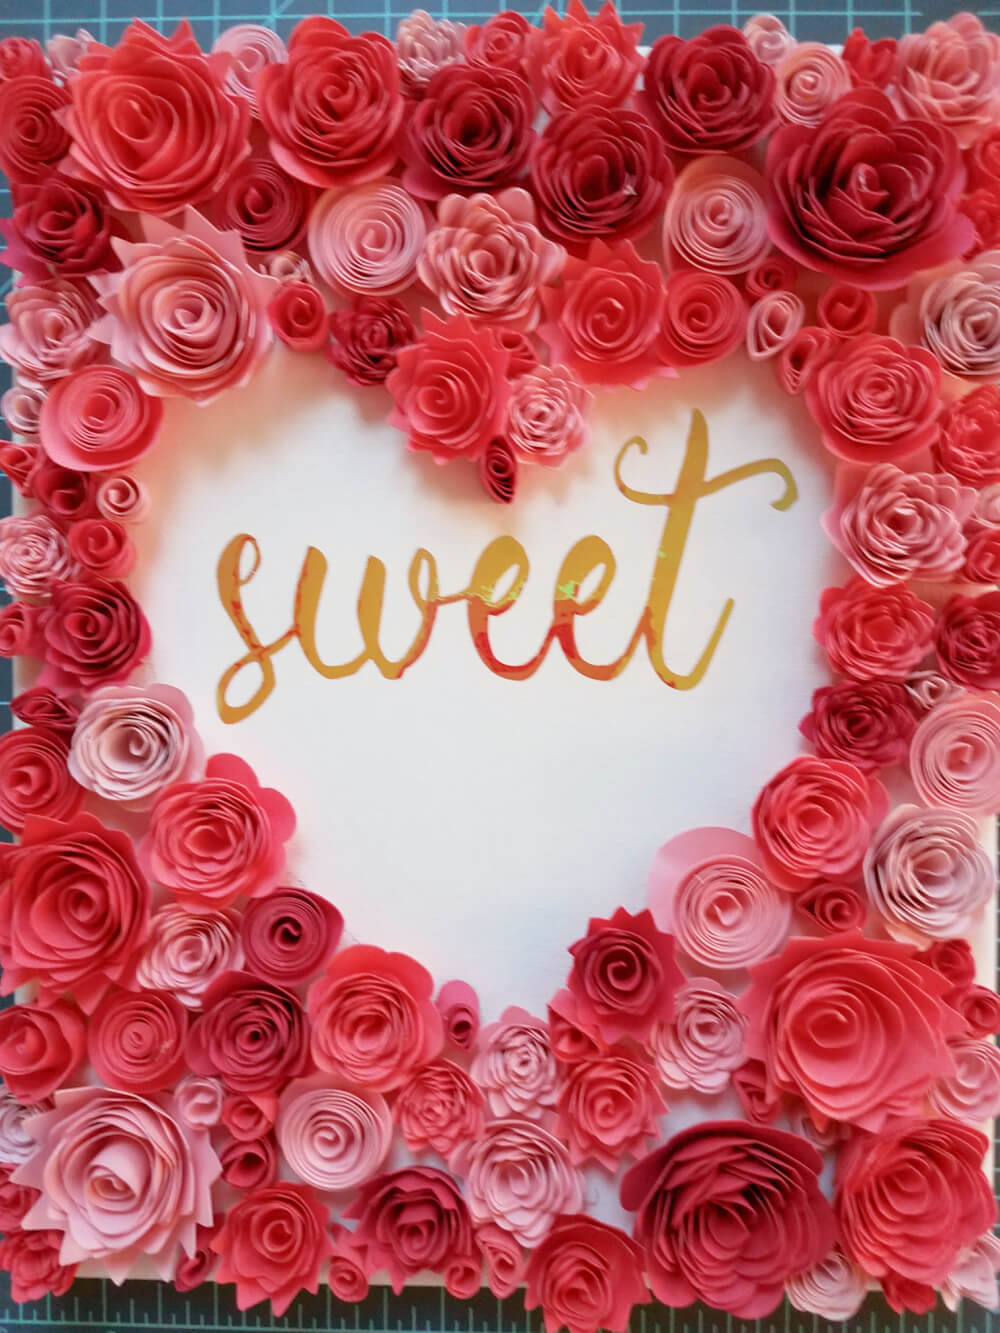 Rolled Flower Wall Art for Valentine’s Day